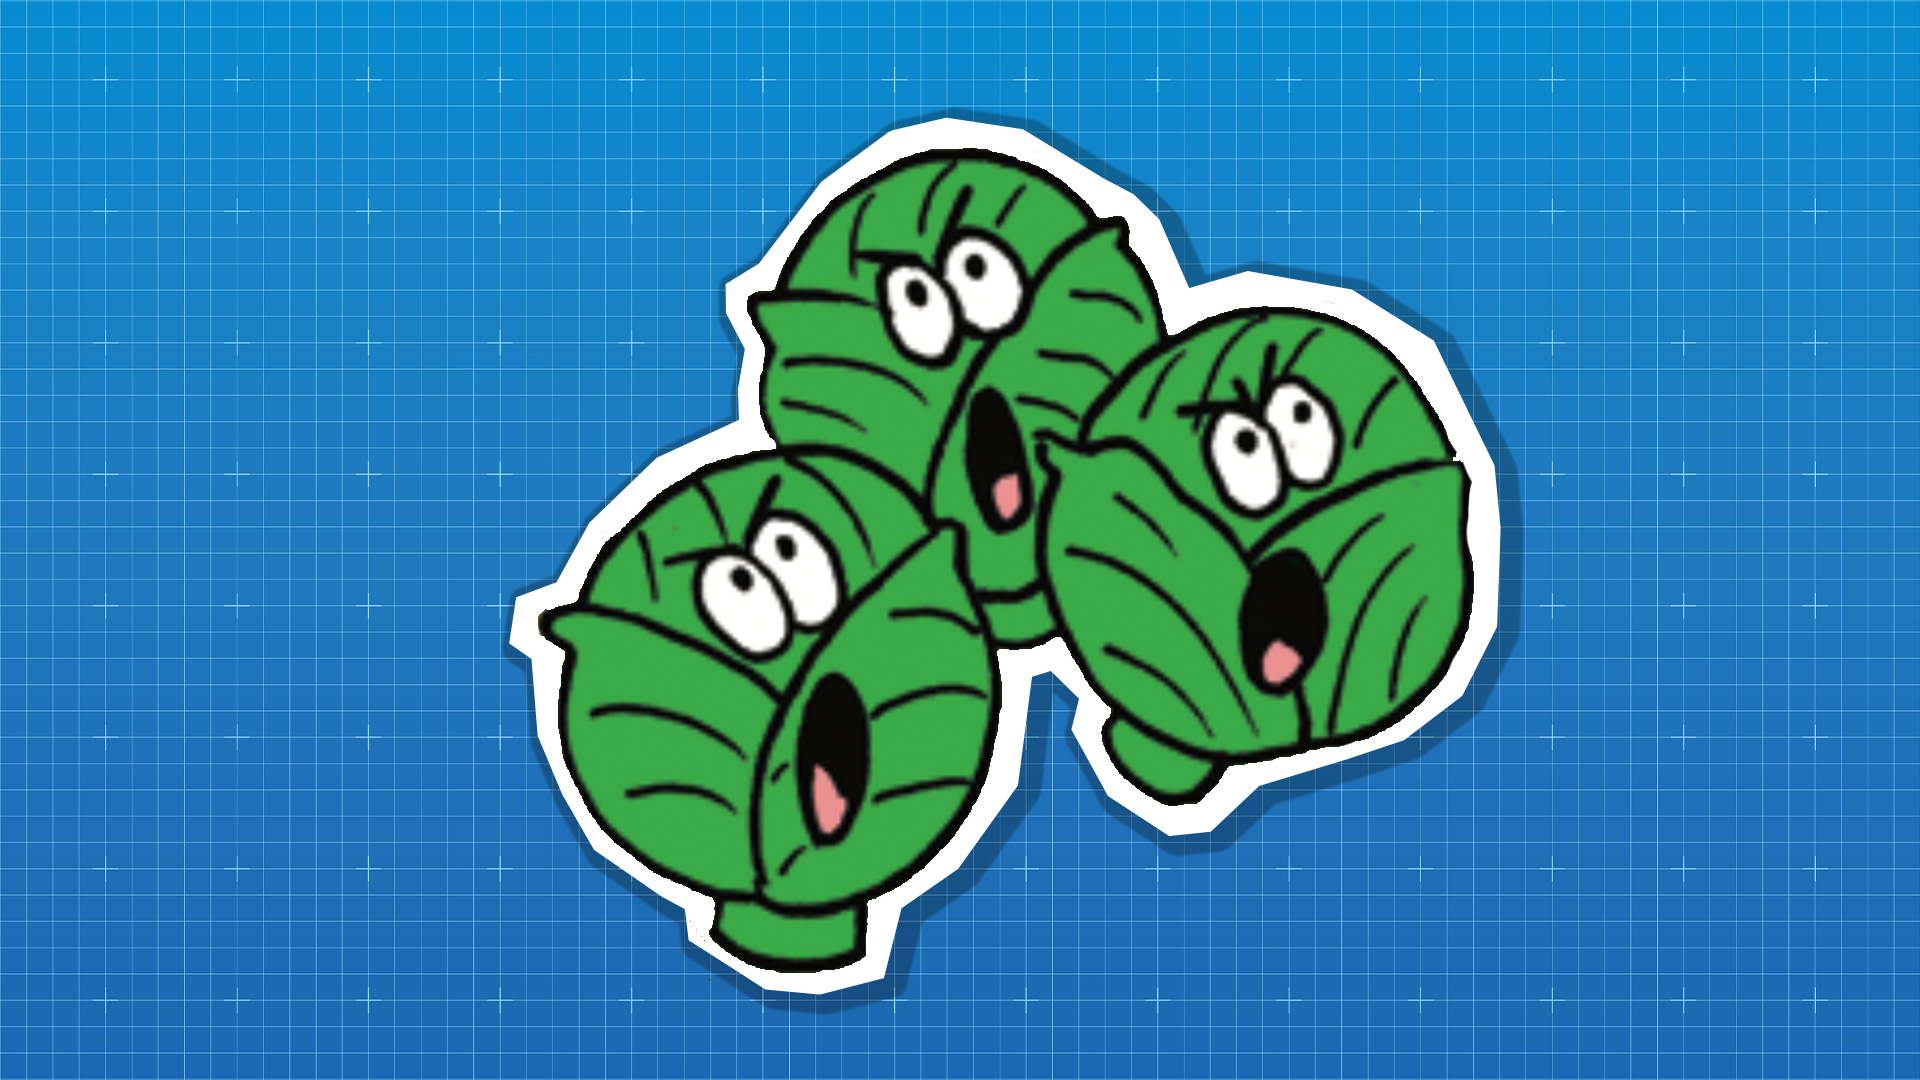 A gang of evil Brussels sprouts